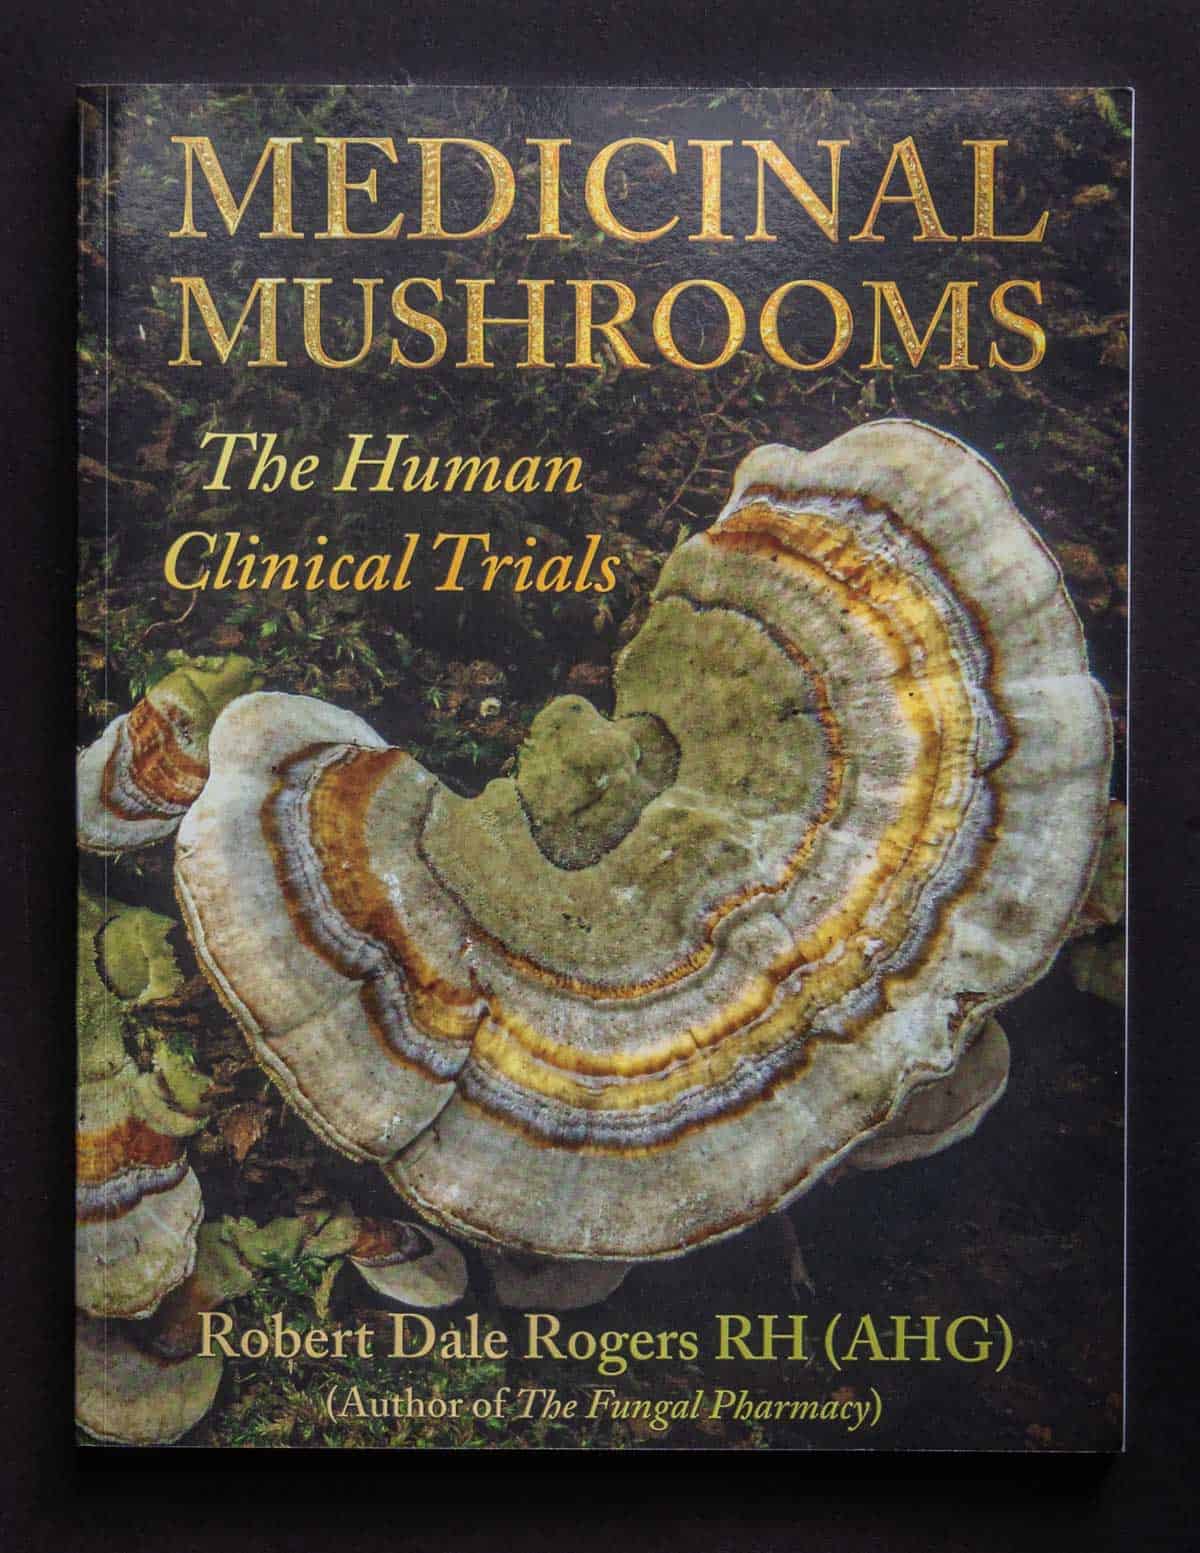 A picture of the book medicinal mushrooms: the human clinical trials.